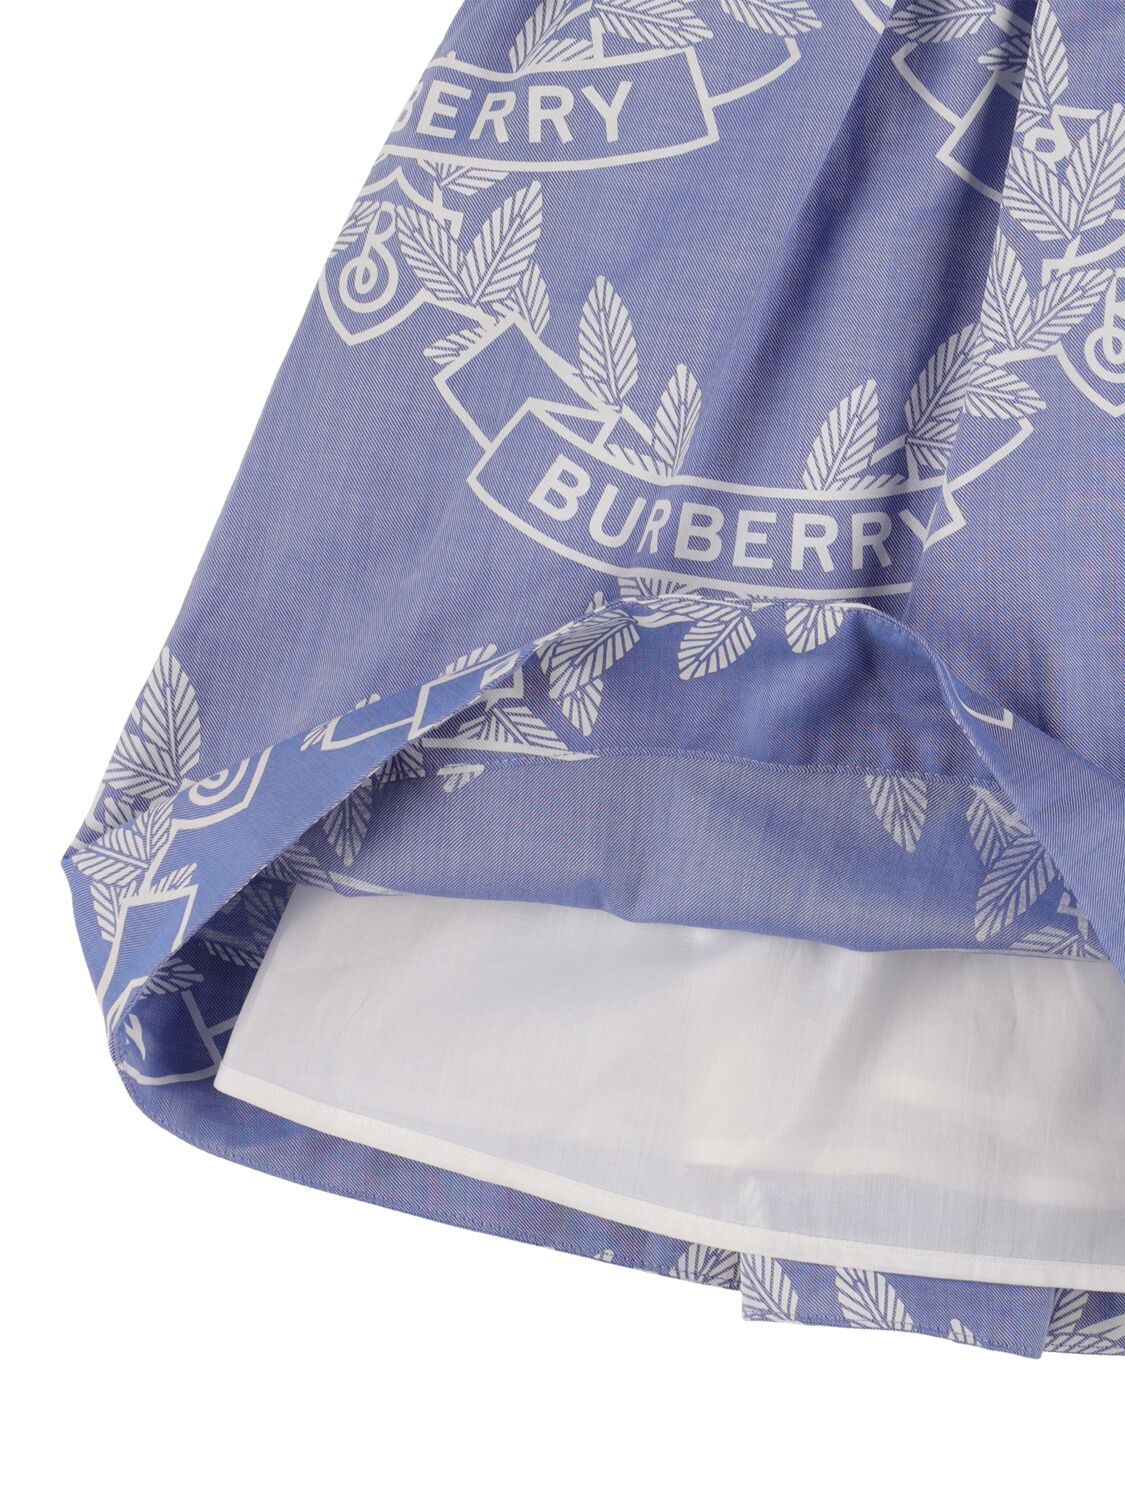 Shop Burberry Printed Cotton Dress W/ Puff Sleeves In Light Blue